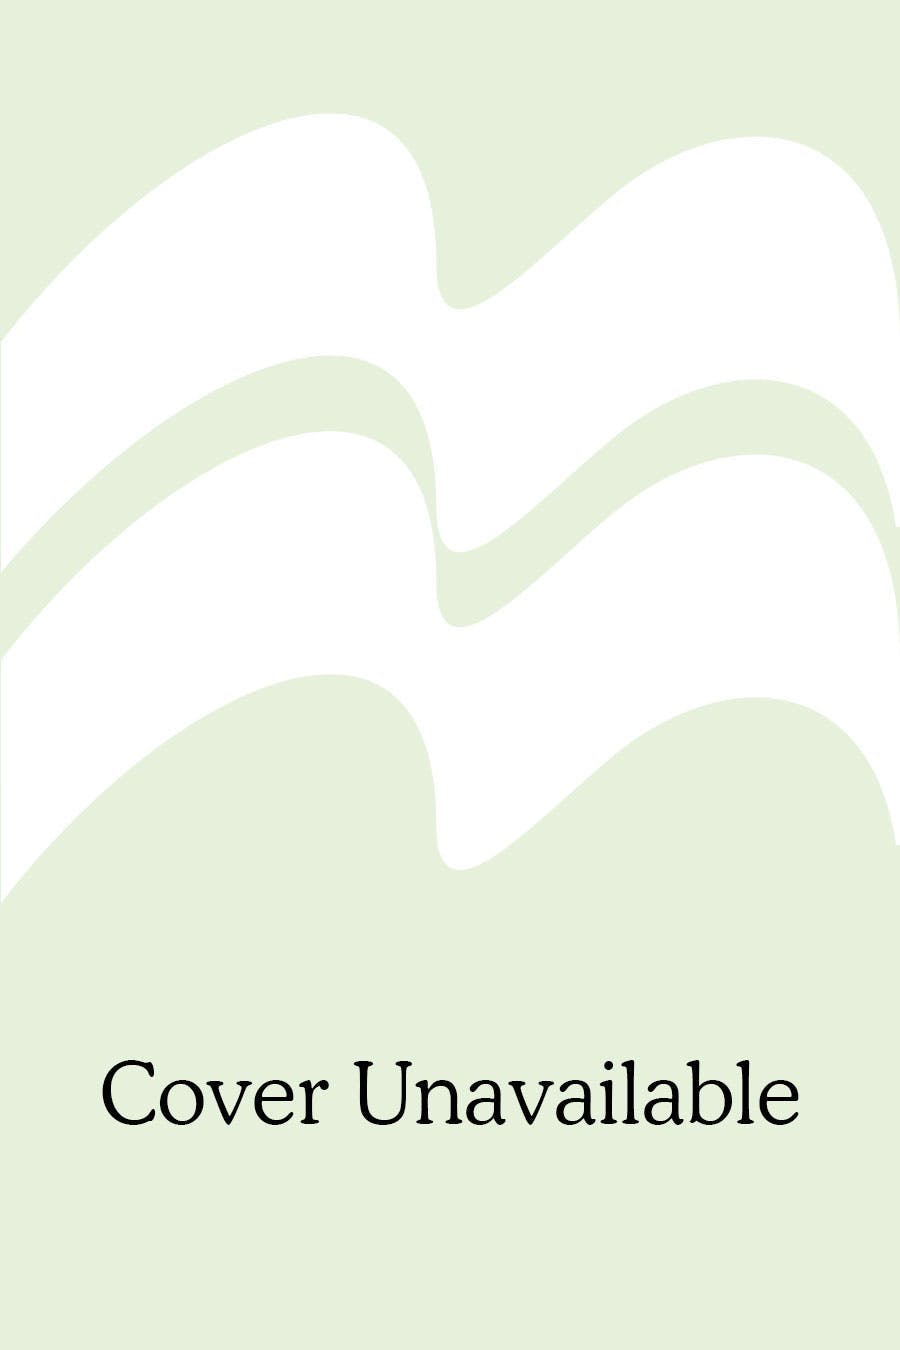 Cover for the book titled as: One Man's Universe